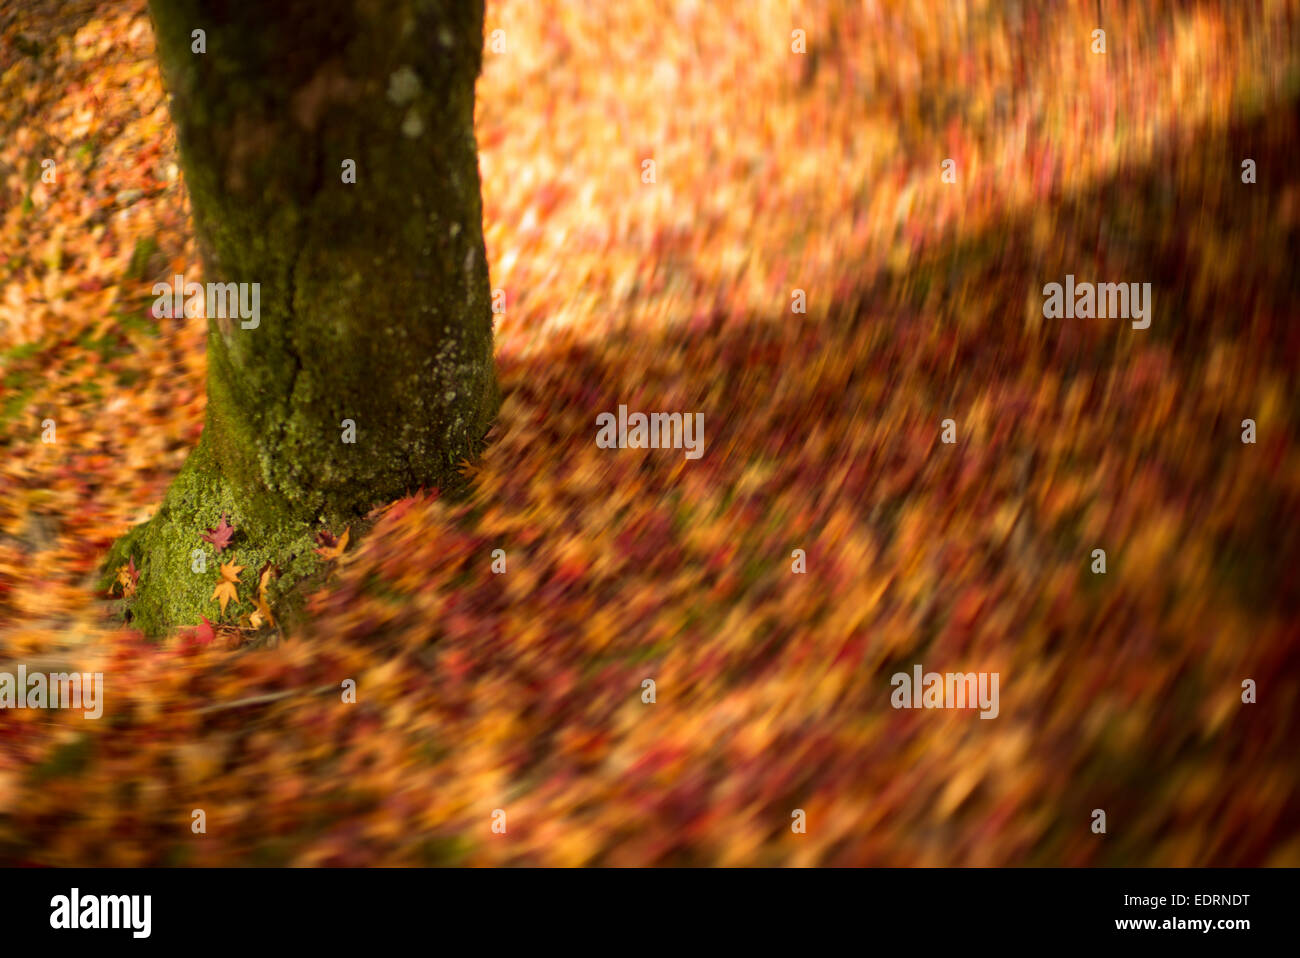 Carpet of autumn leaves in Japan swirling around. Stock Photo